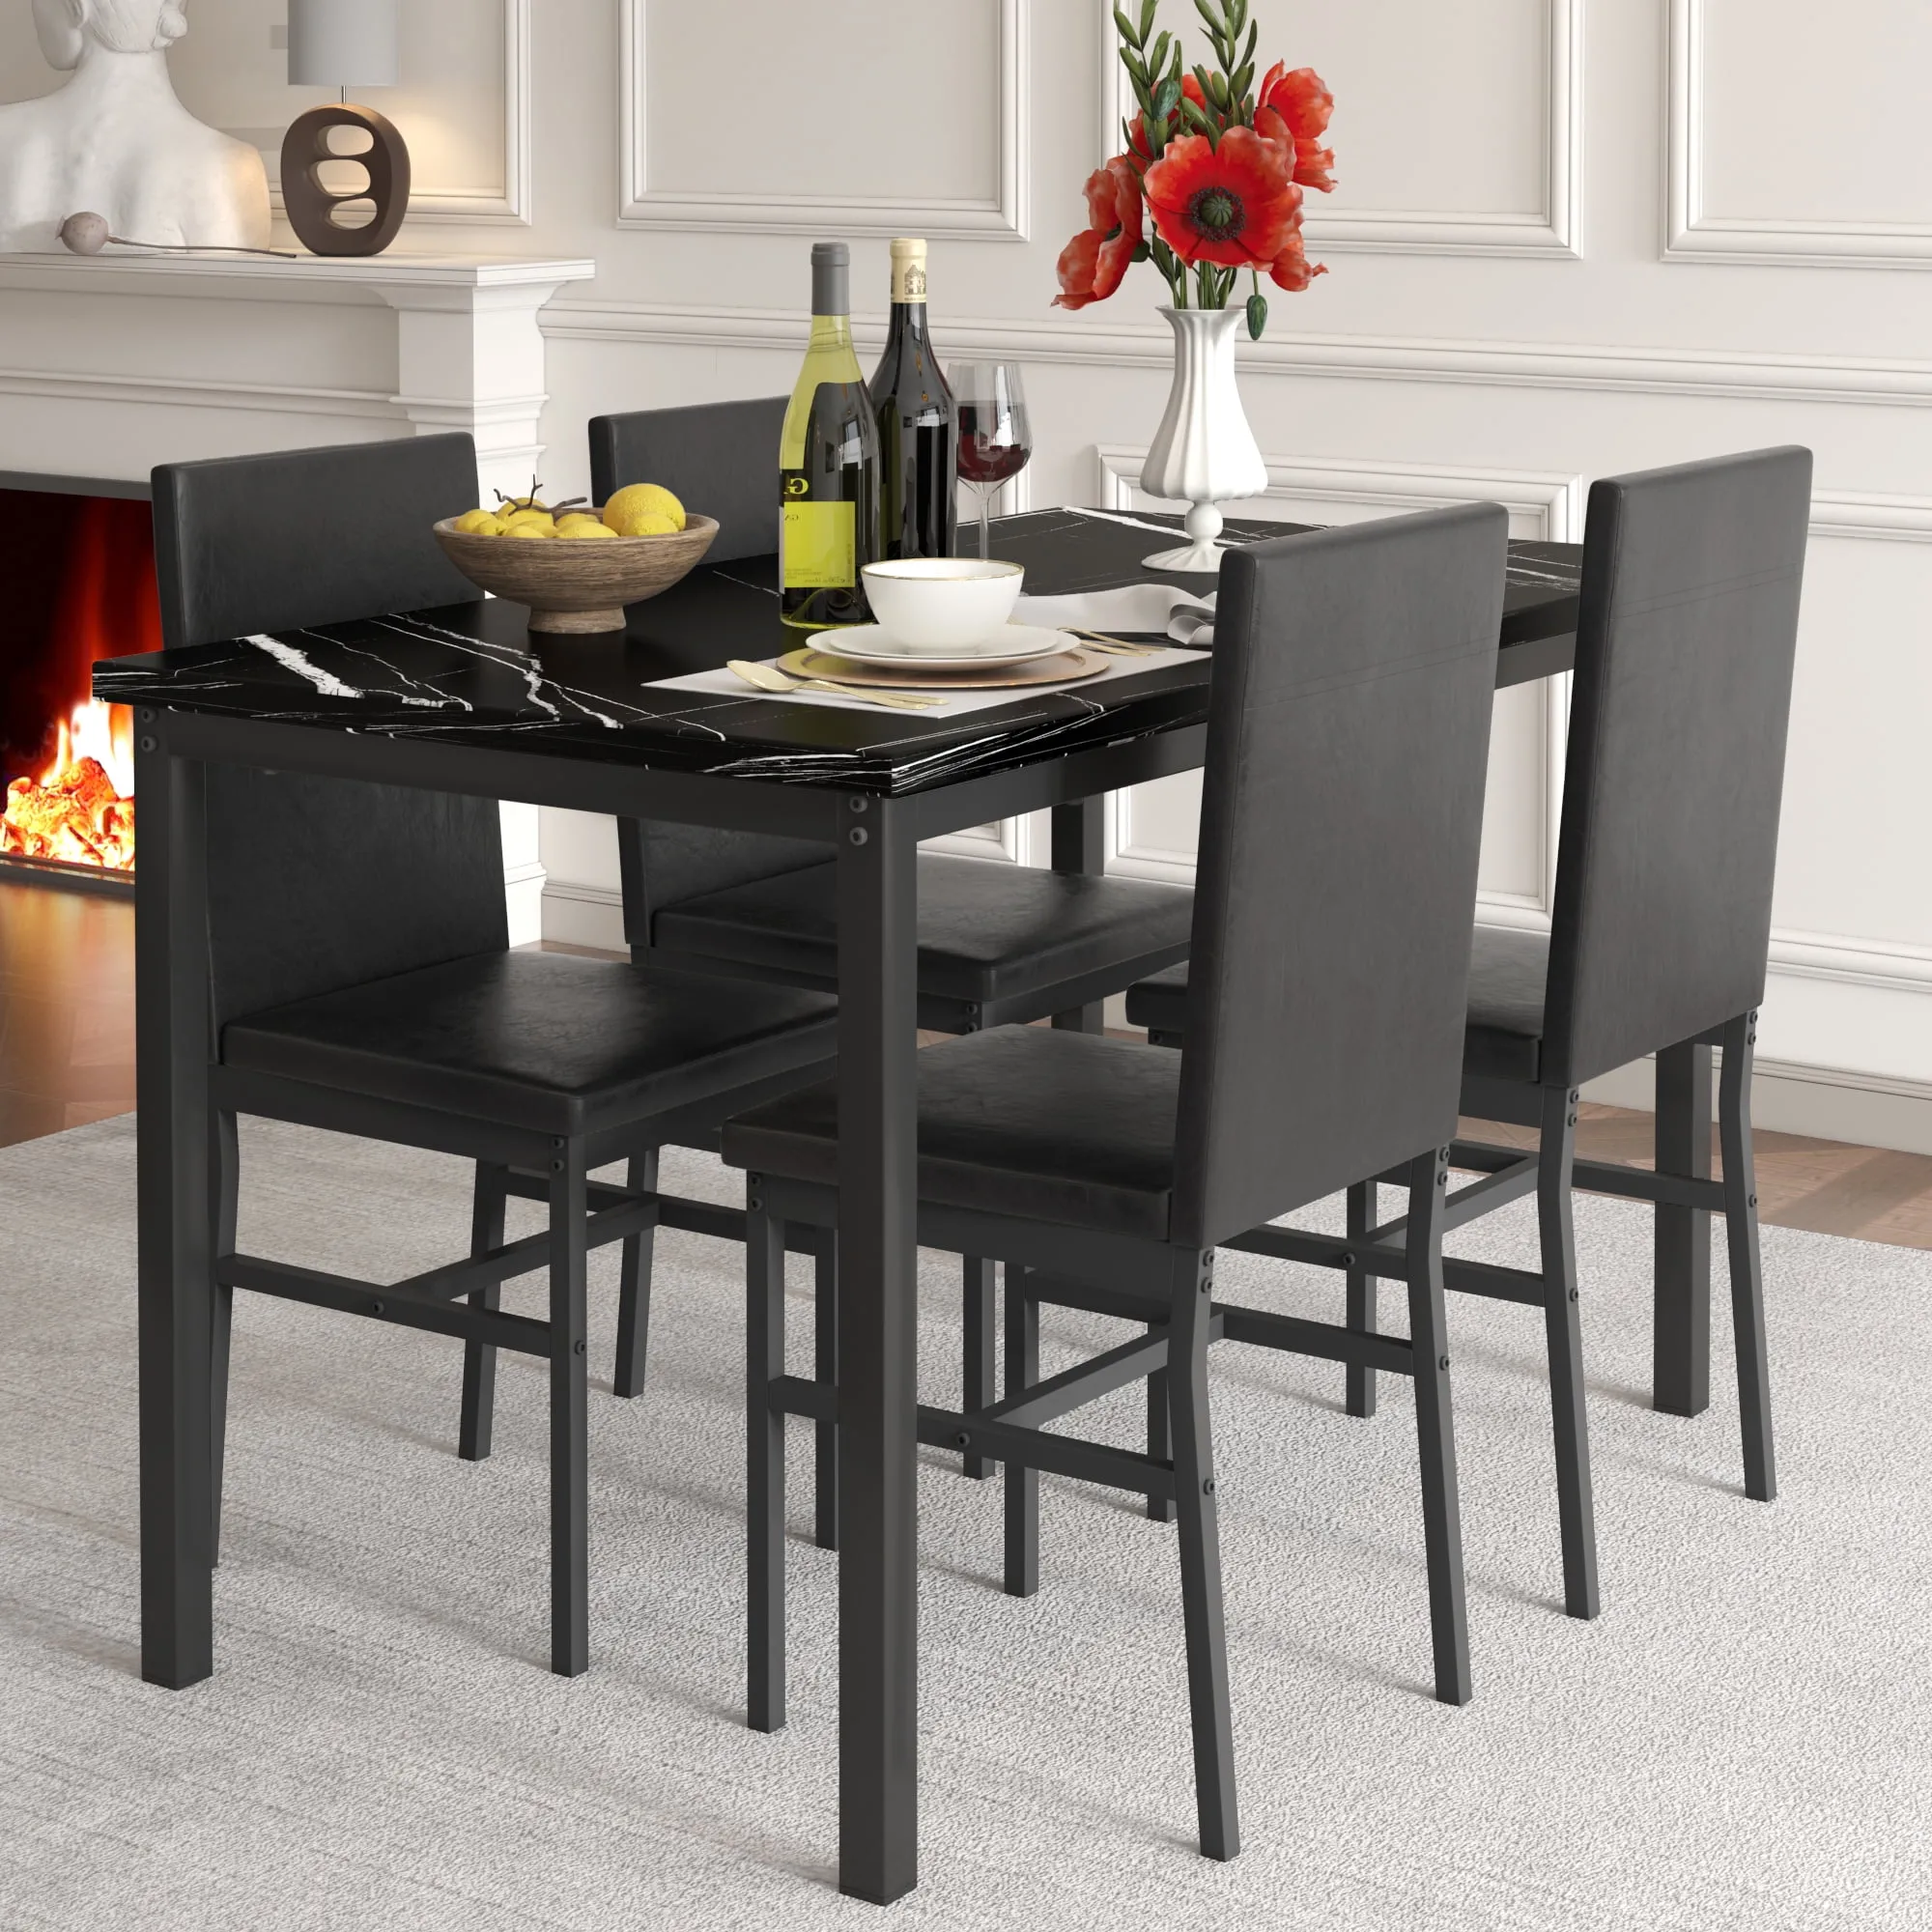 5 Piece Dining Table Set (Modern Faux Marble Tabletop and 4 PU Leather Upholstered Chairs)